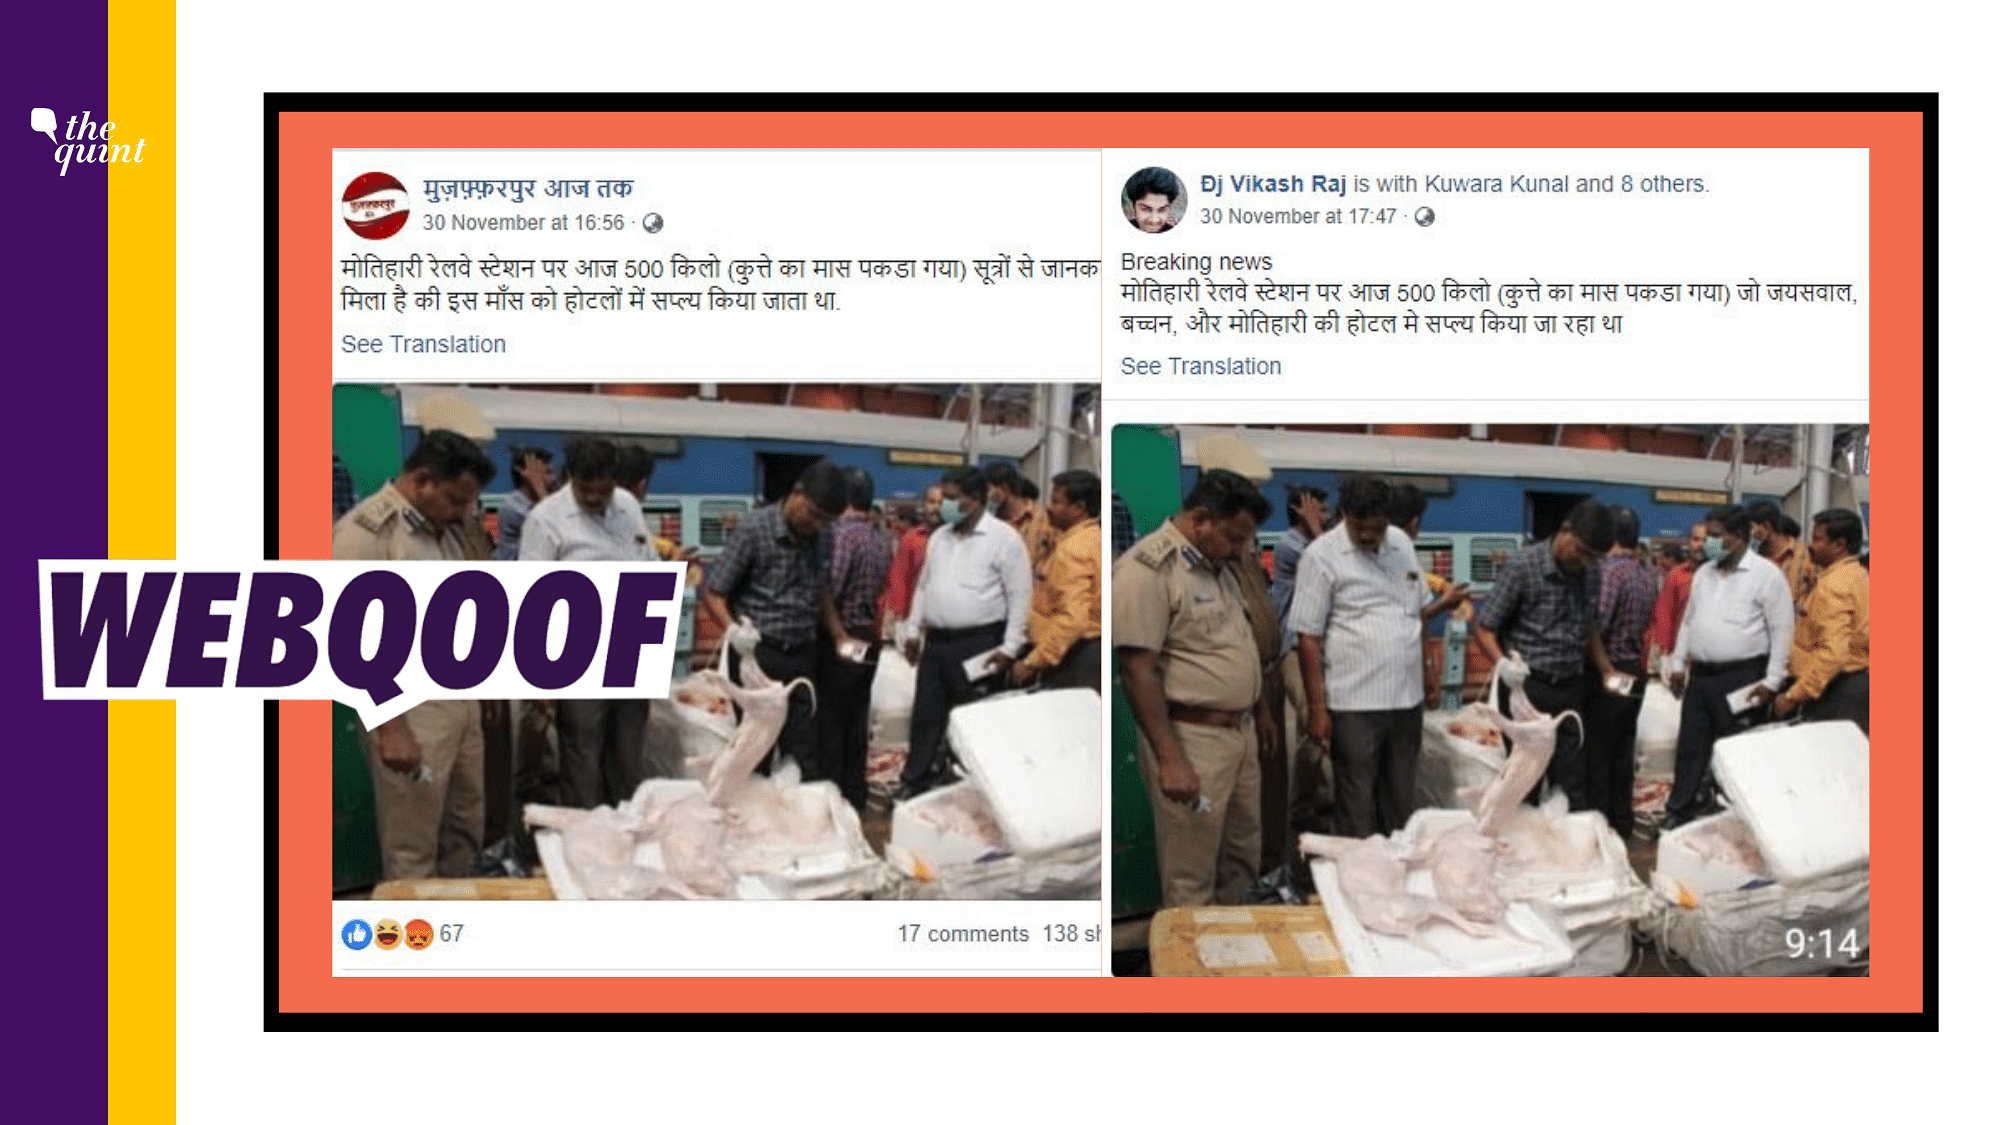 An image of cops seizing dog meat at a railway station is doing the rounds on social media with misleading claims.&nbsp;